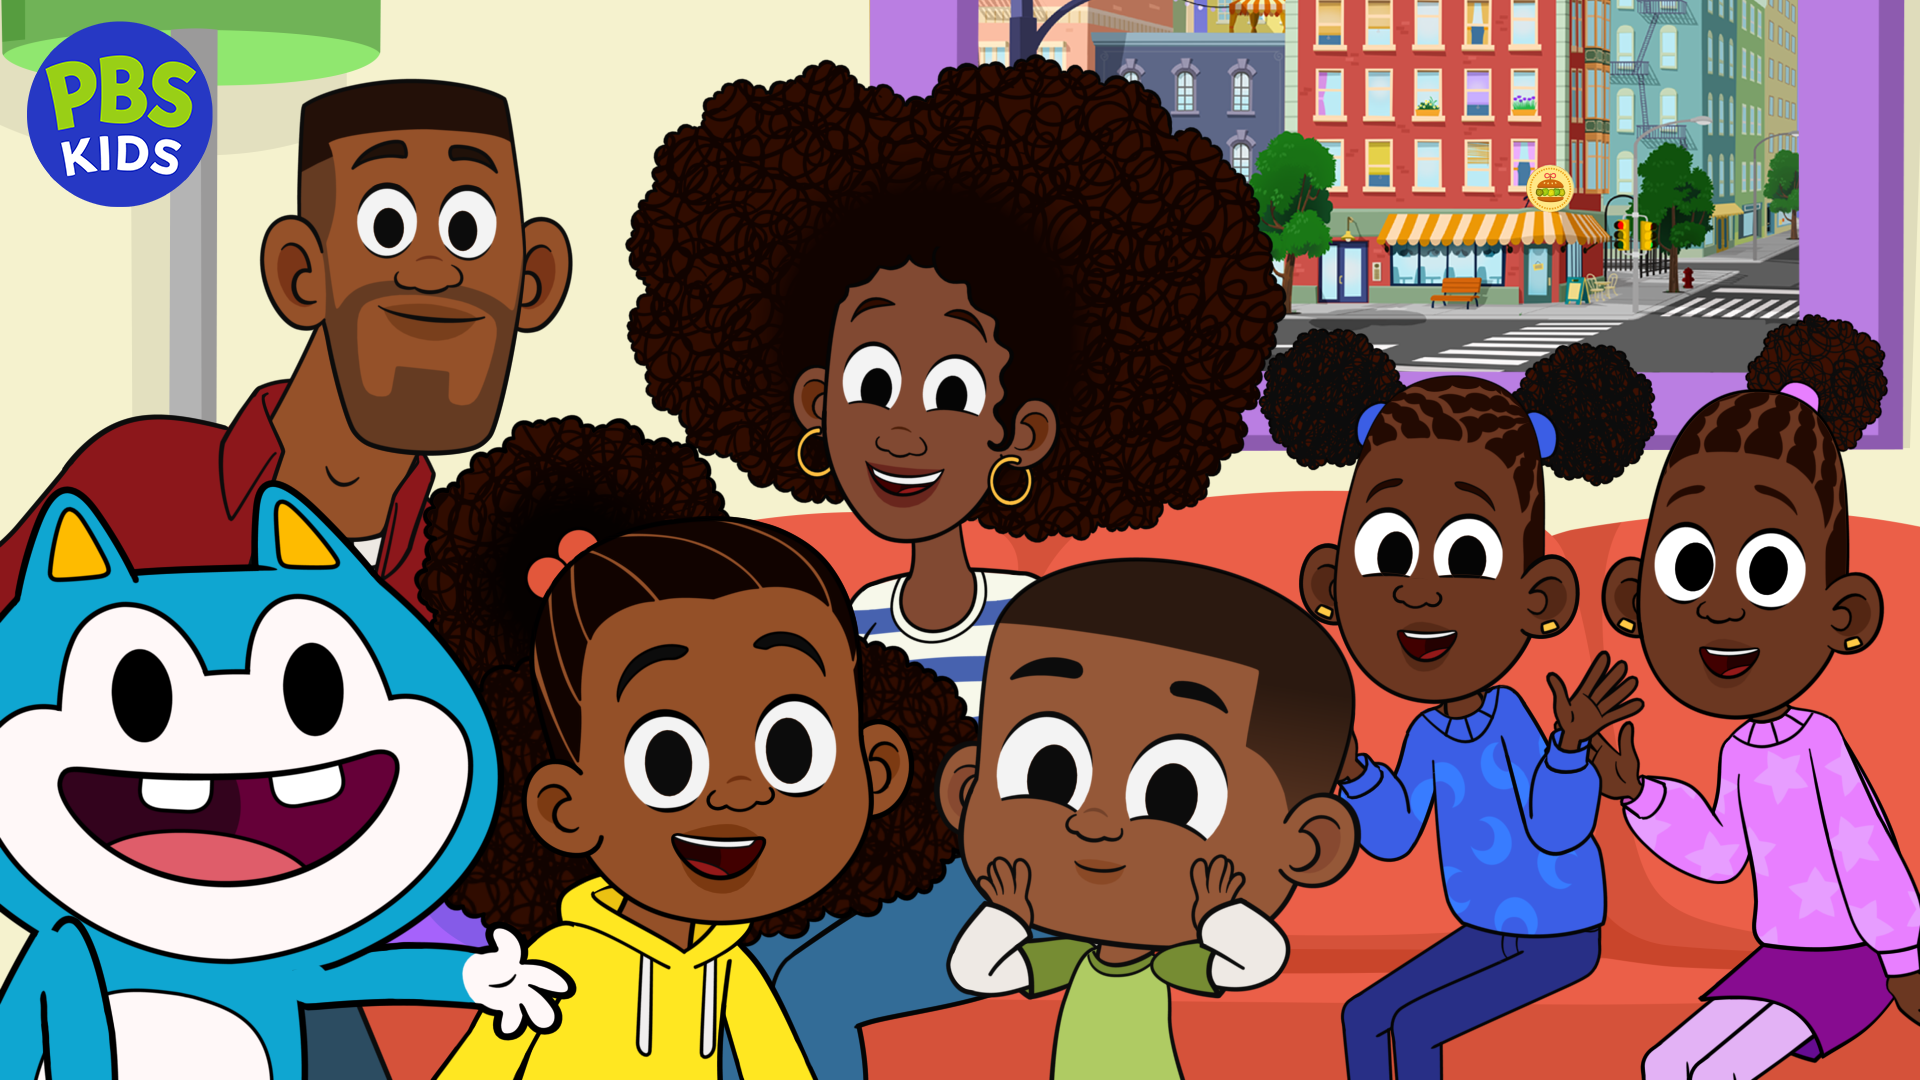 PBS KIDS Announces CARL THE COLLECTOR, Its First Series Centering on  Autistic Characters